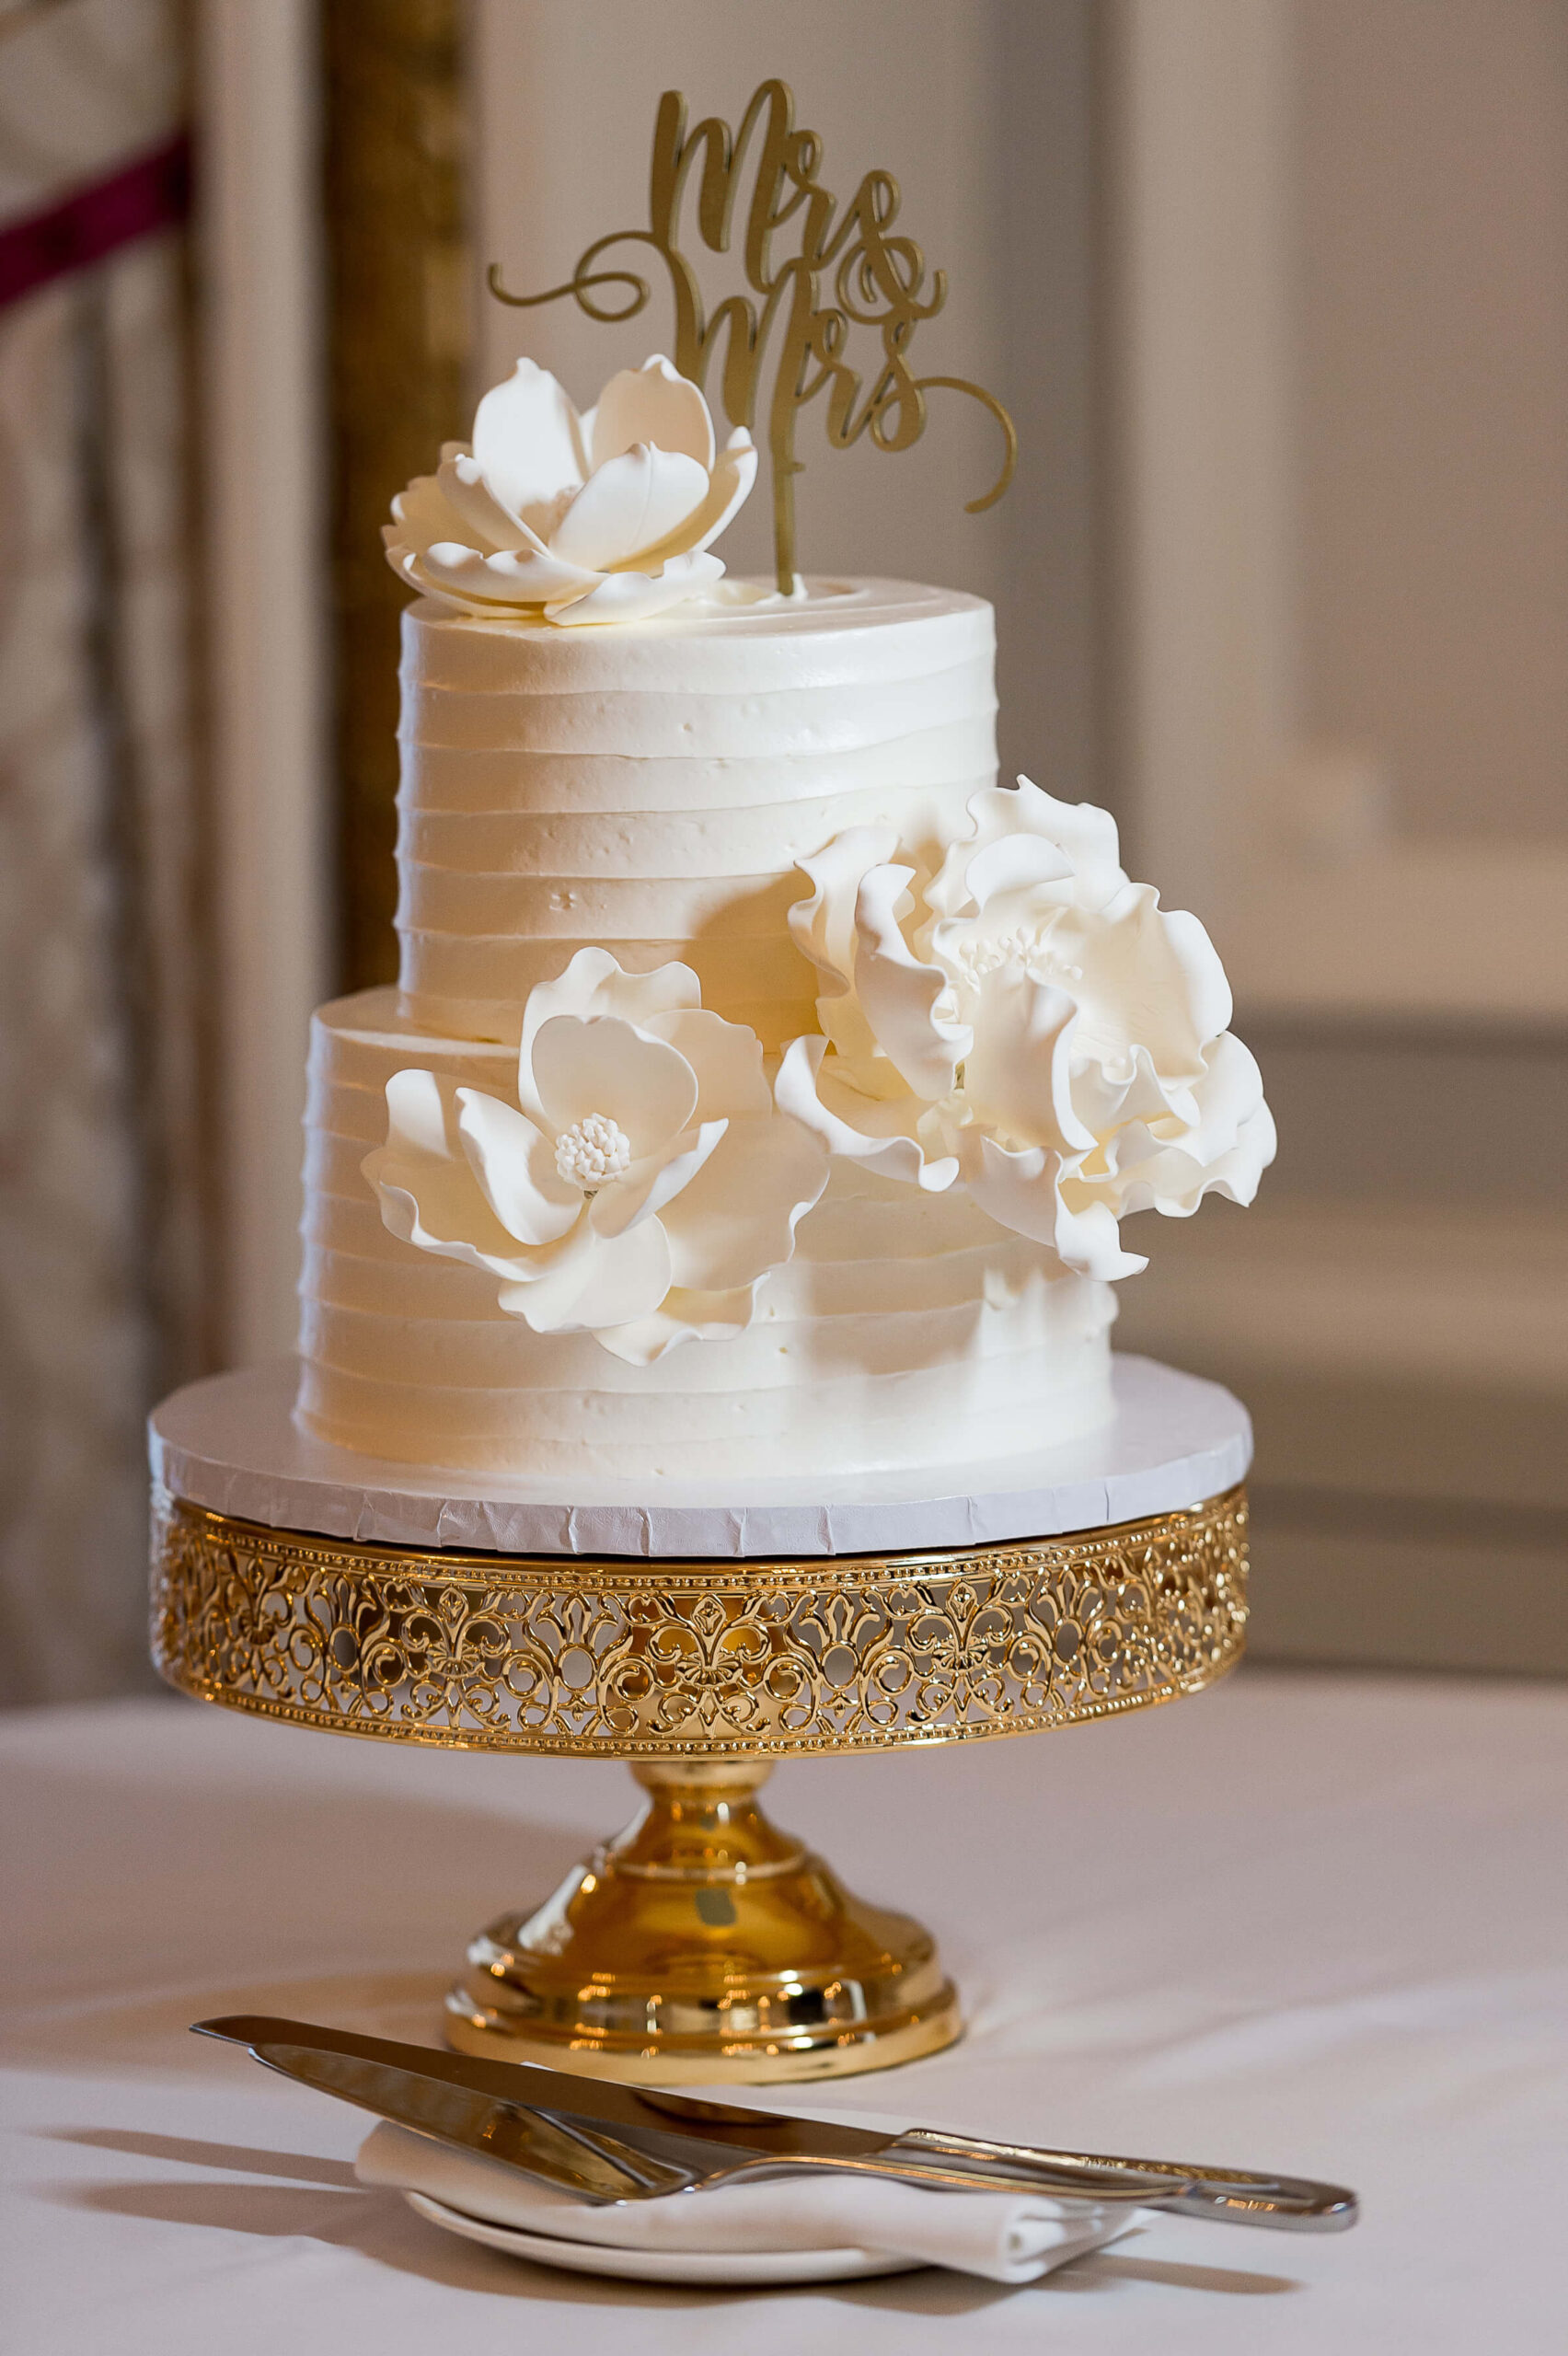 an elegant wedding cake in white with gold accents